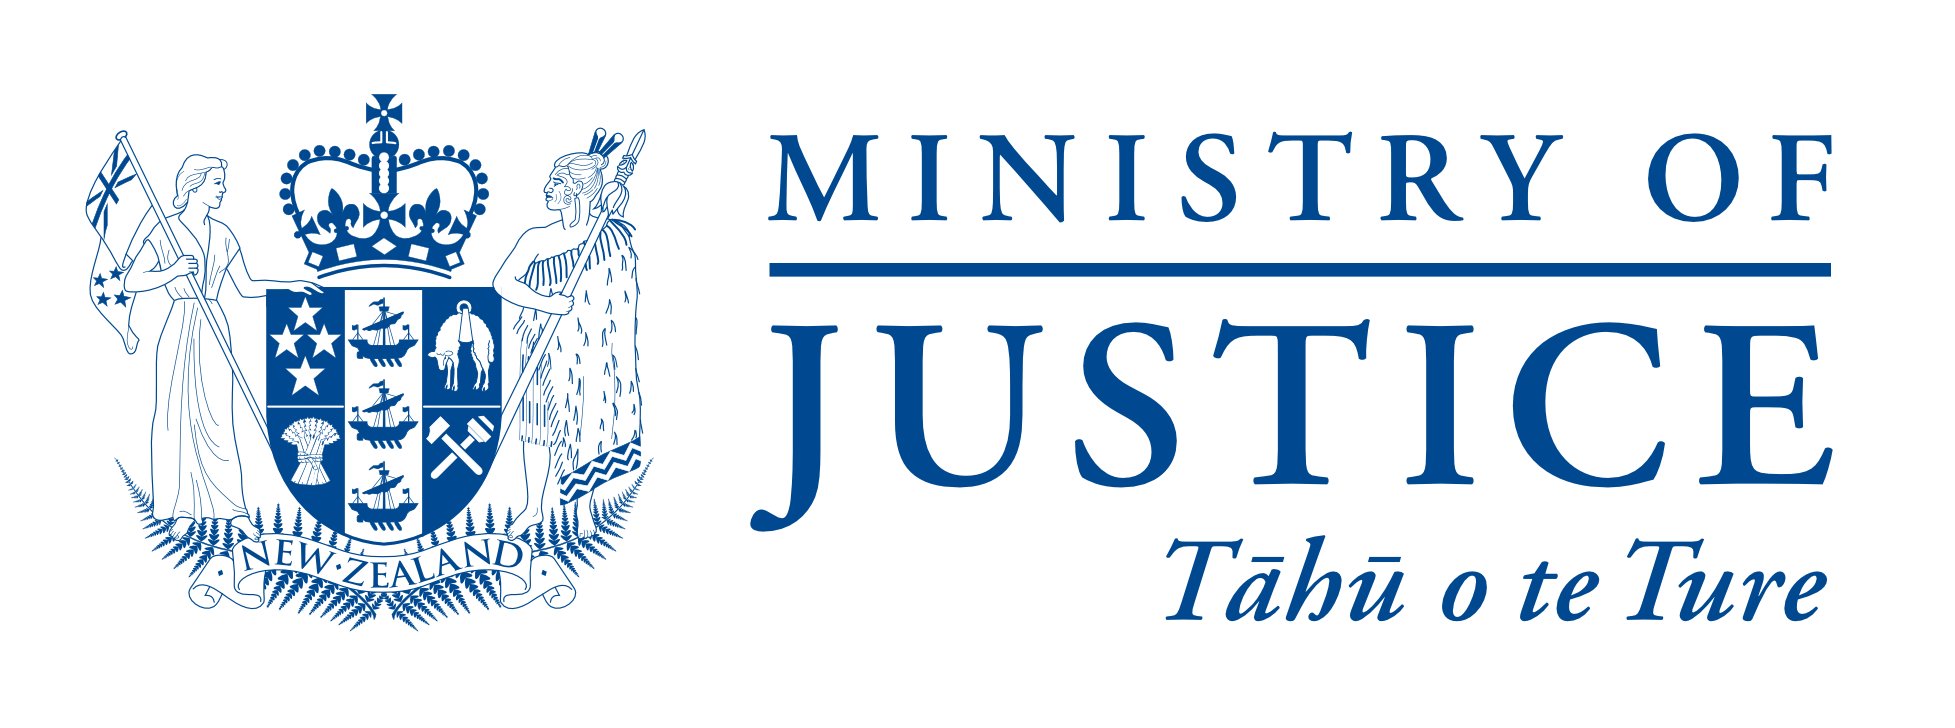 Ministry-of-Justice-blue-onwhite1.jpg